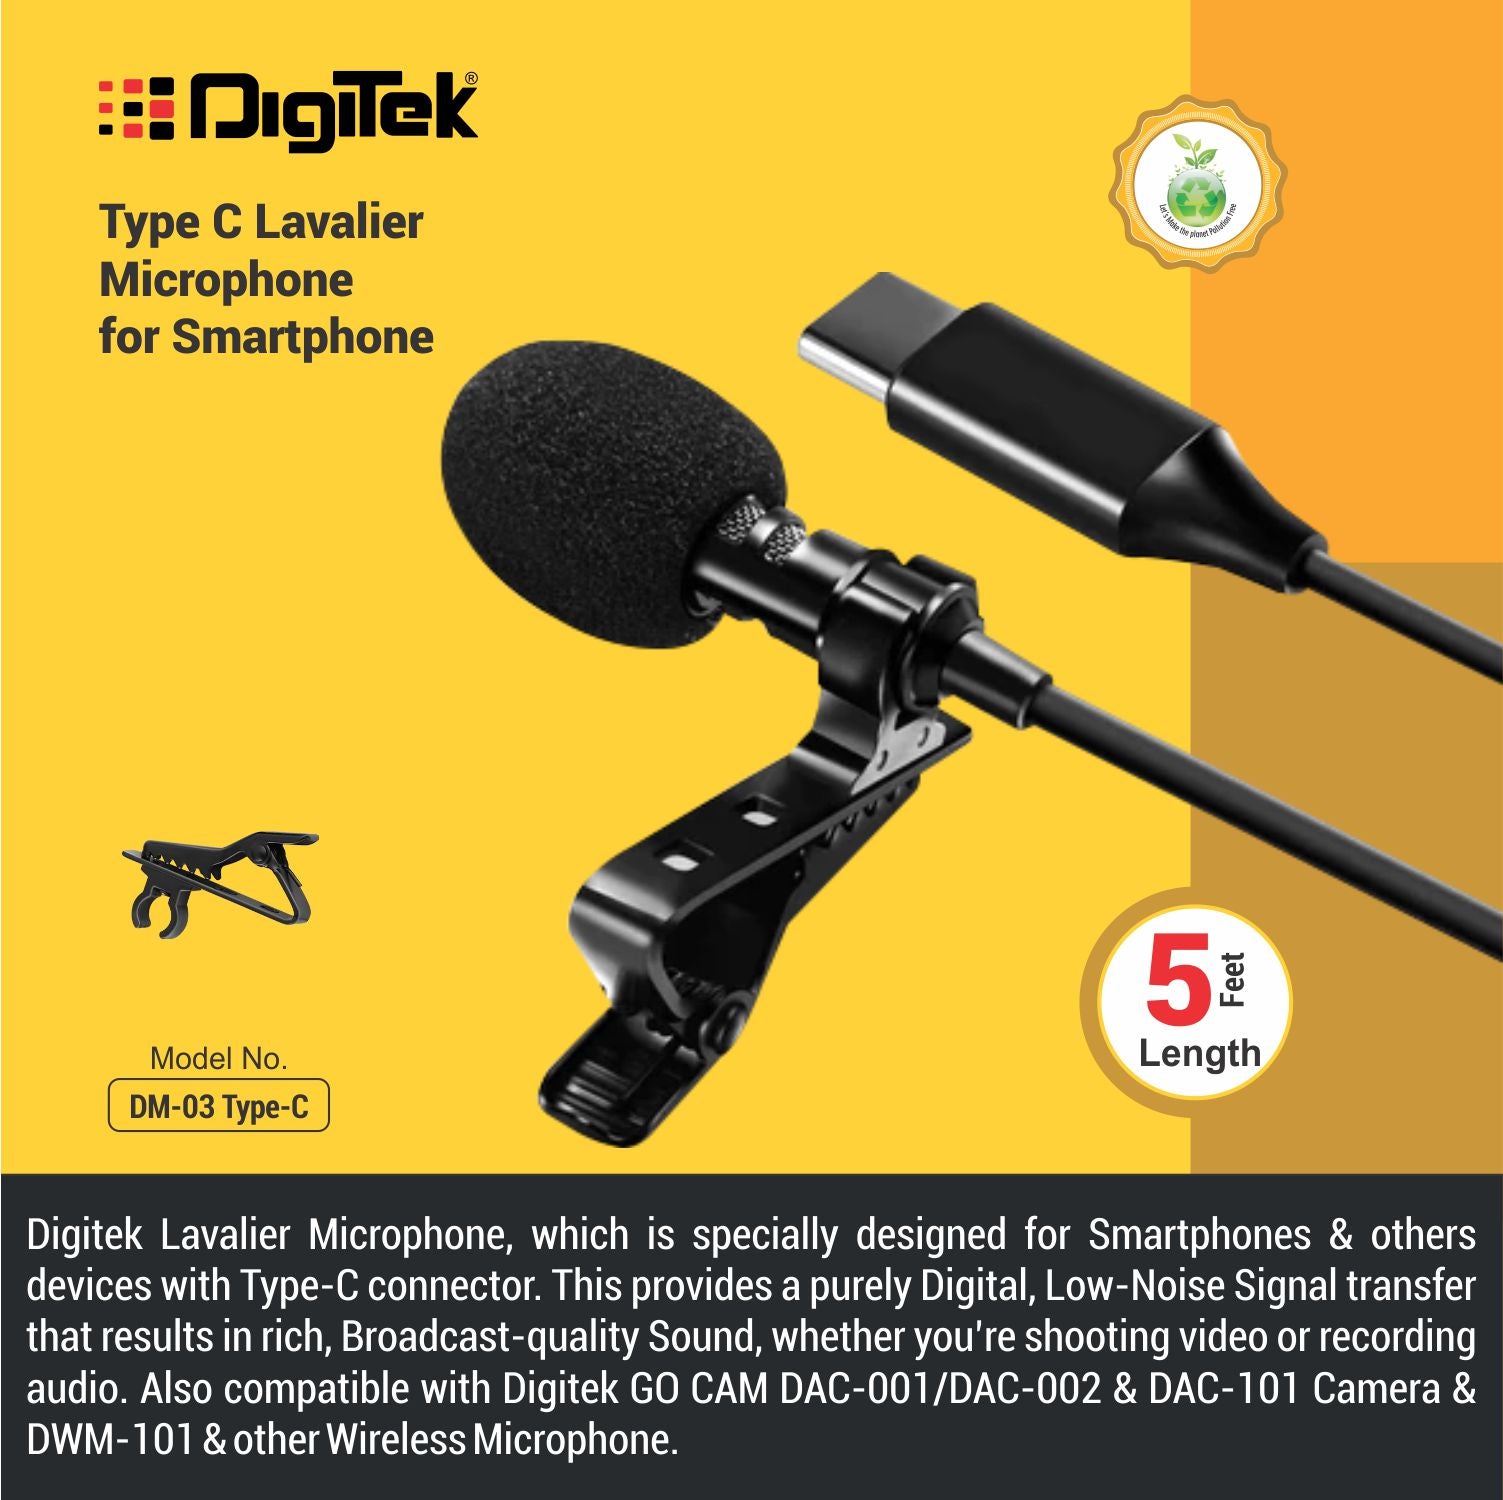 Digitek(DM-03Type-C)Lavalier Omnidirectional Microphone,Clip on Collar Microphone,Type-C Interface Connector,Low Handing Noise,Compatible with Digitek DAC – 101 & DAC-002, DIGITEK Microphone DWM-101. Also usable with Mobile Phones, Laptop, DSLR & More.